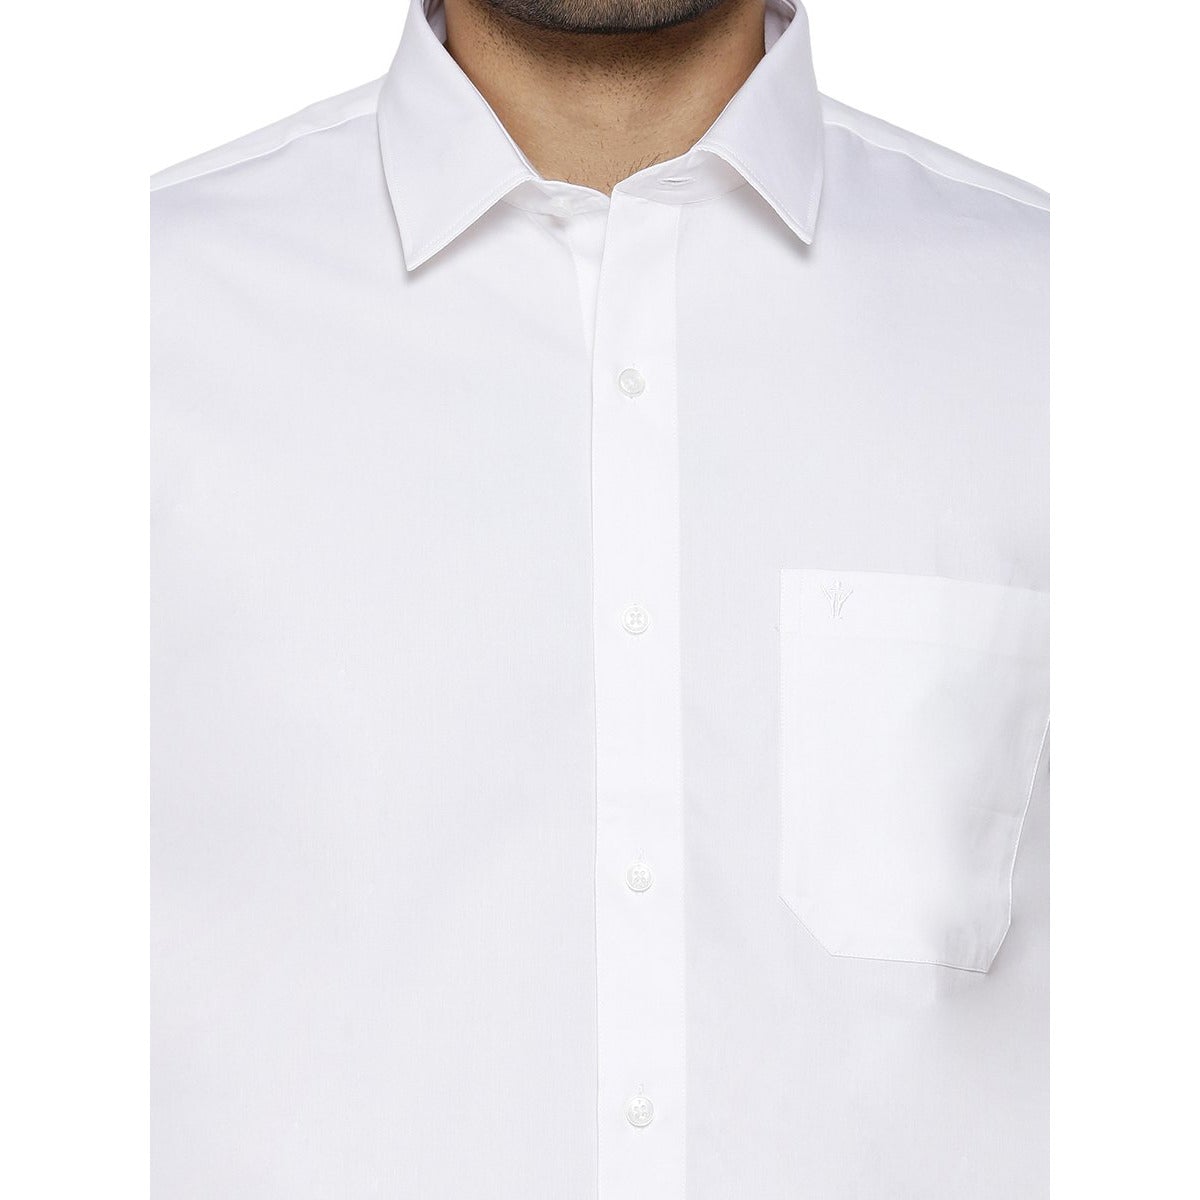 Mens 100% Cotton Half Sleeves White Shirt Super Faast -Zoom view